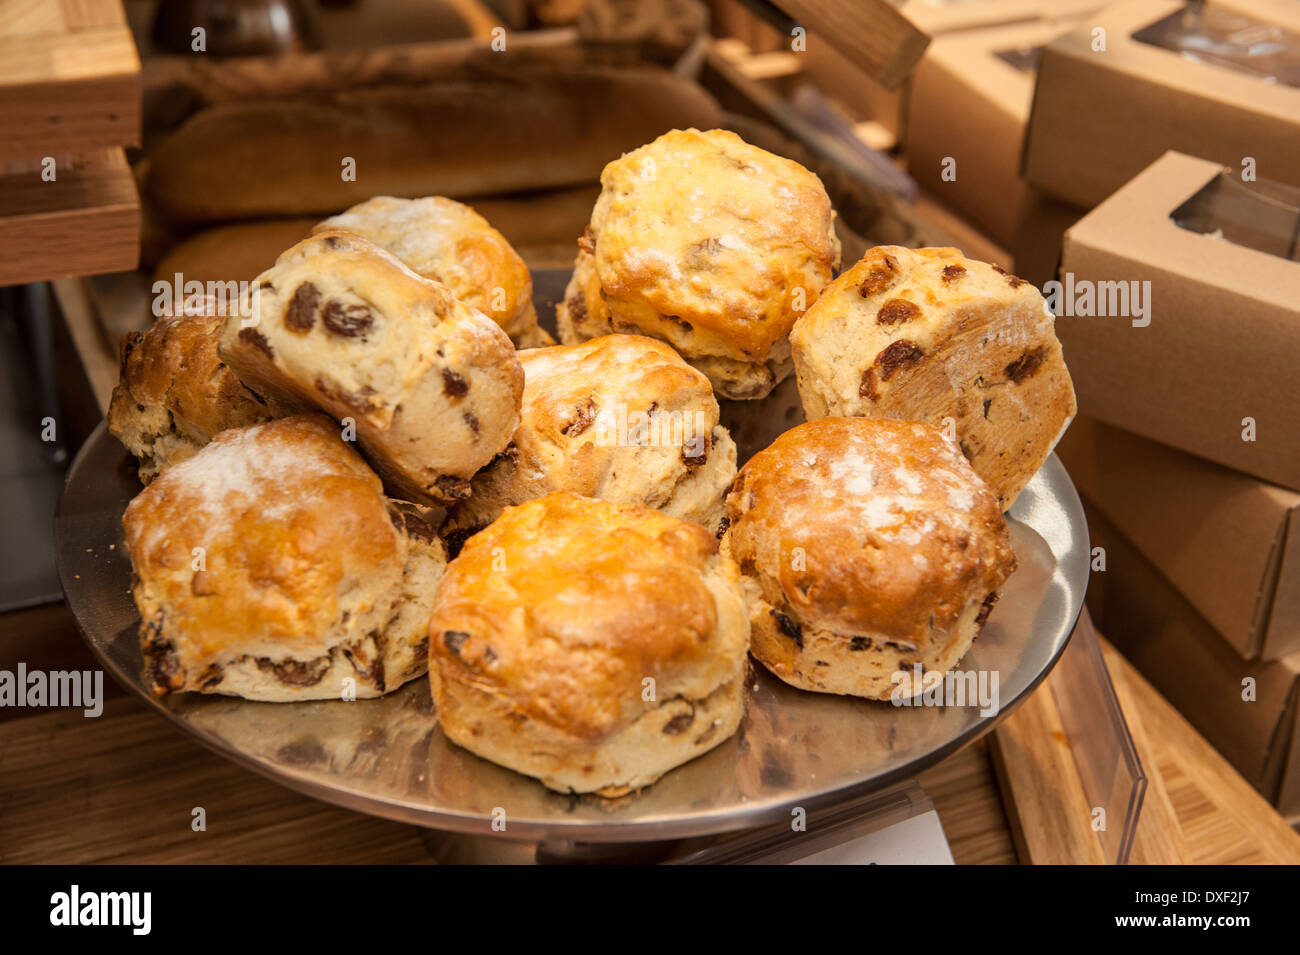 A platter of freshly baked scones in the bakery section of a shop. Stock Photo